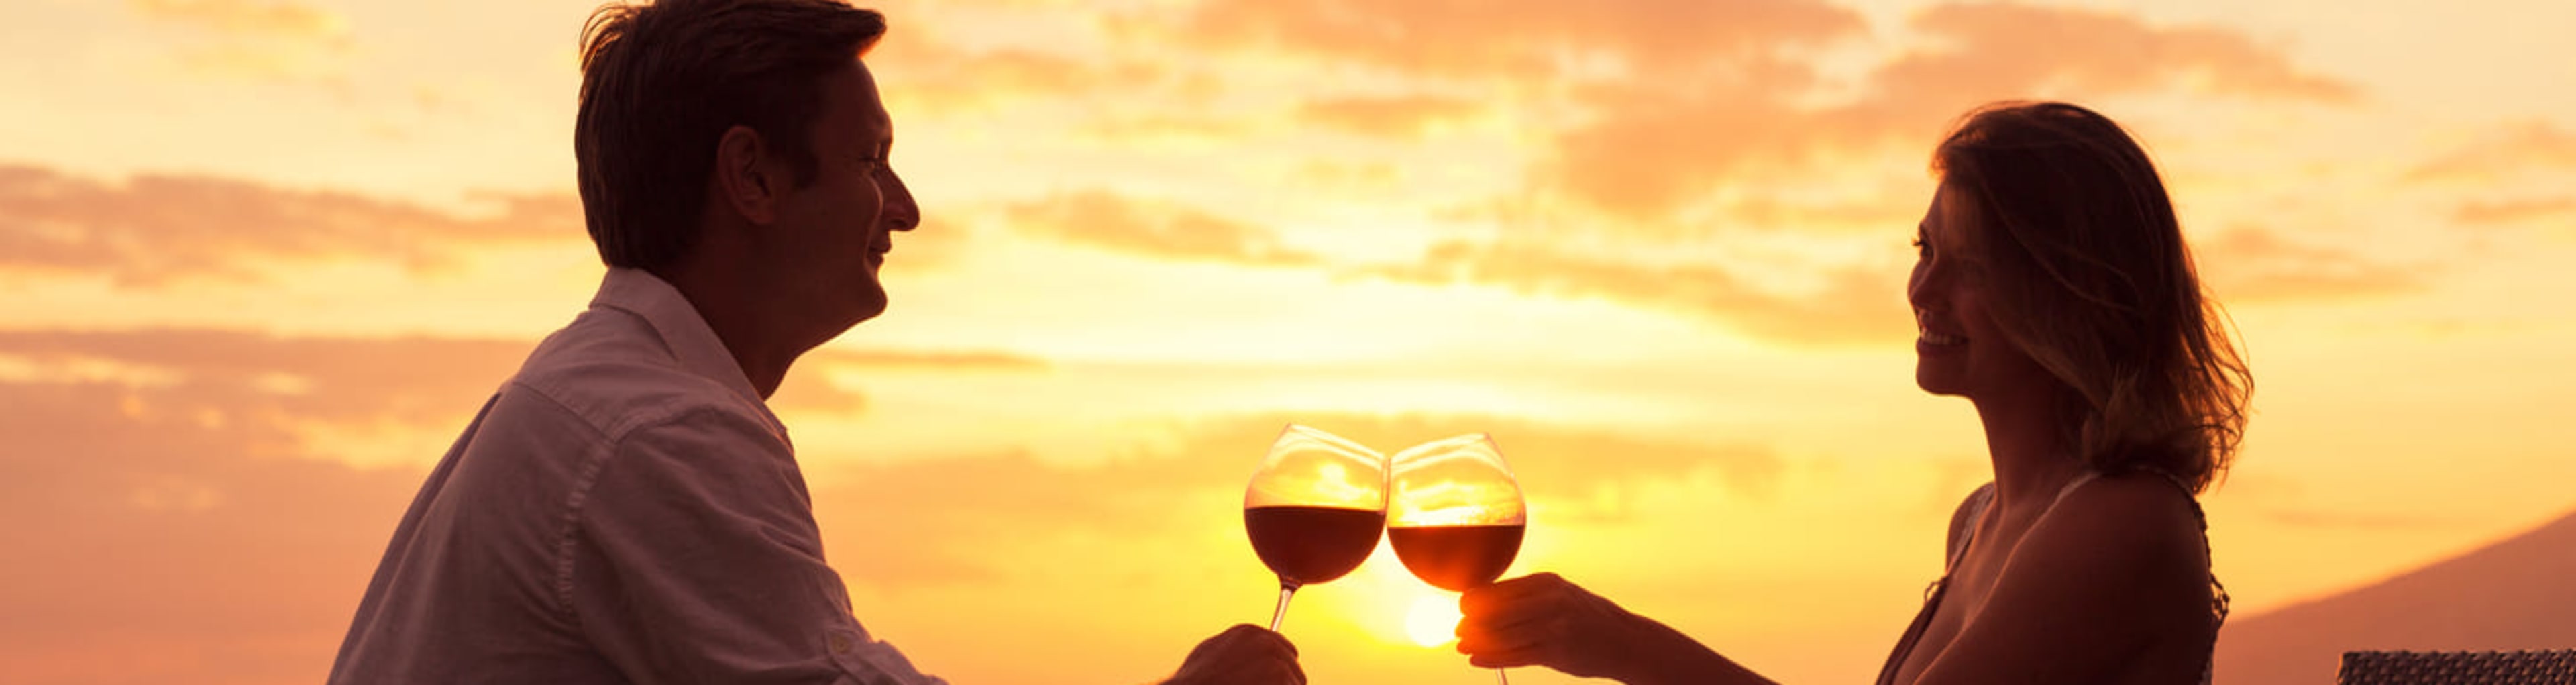 Couple drinking wine on a beach at sunset